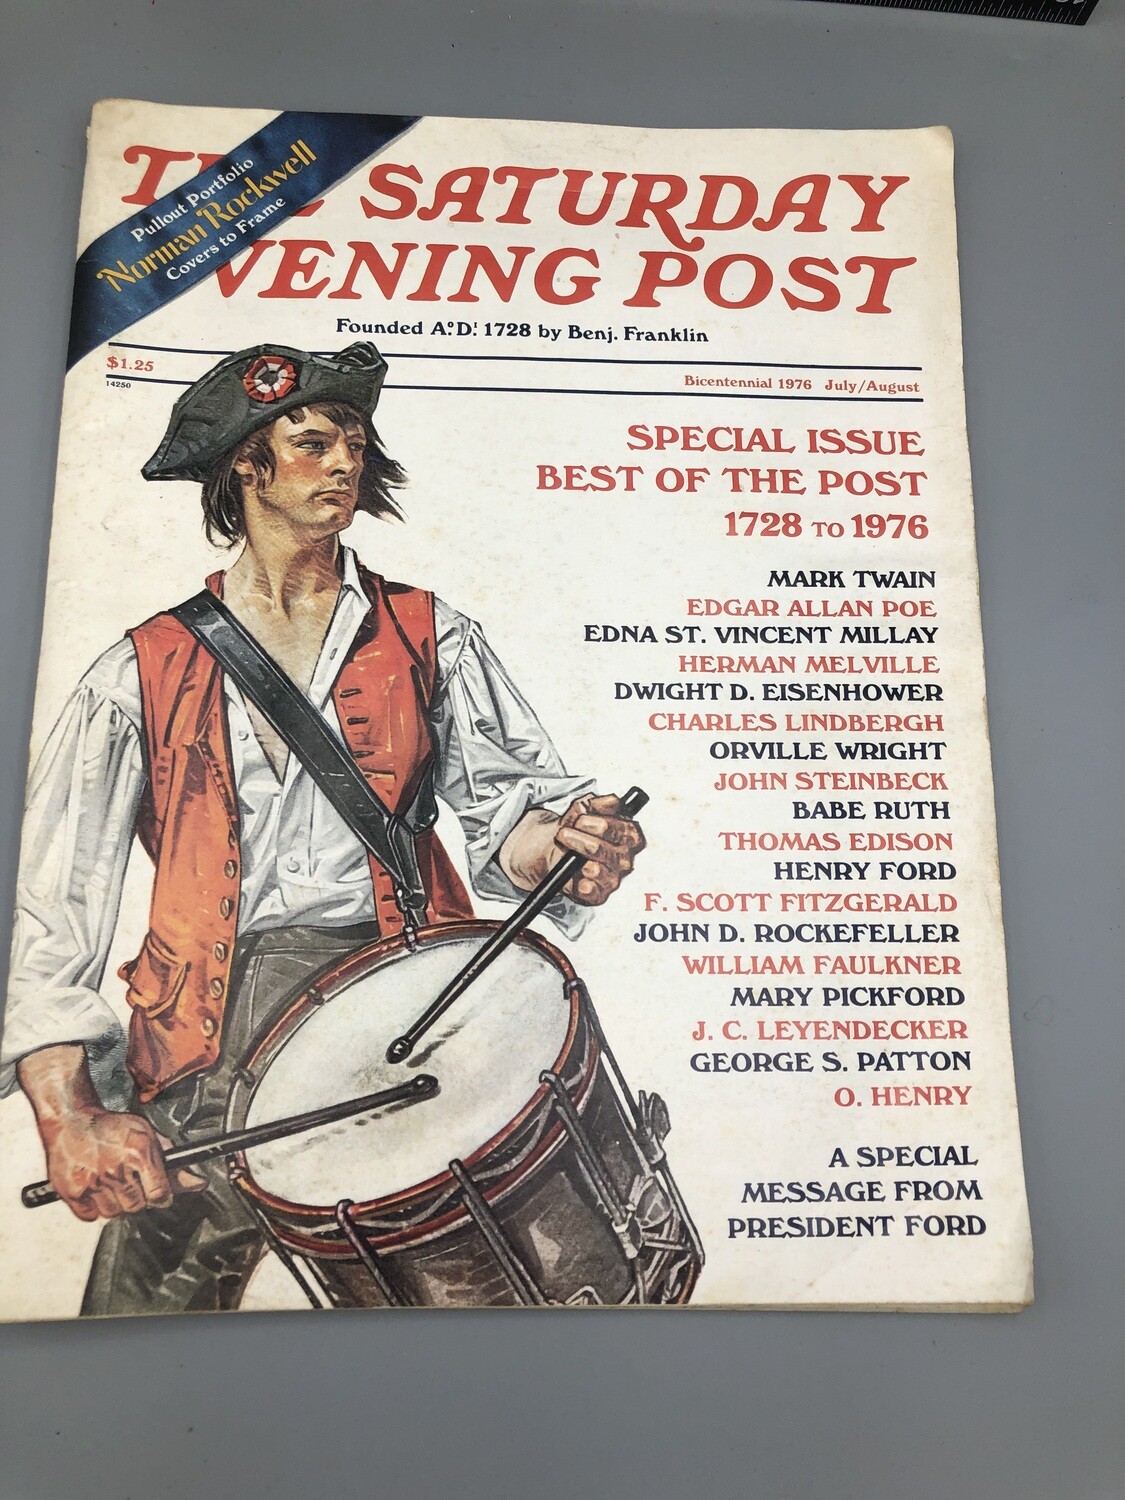 Saturday Evening Post July/August 1976